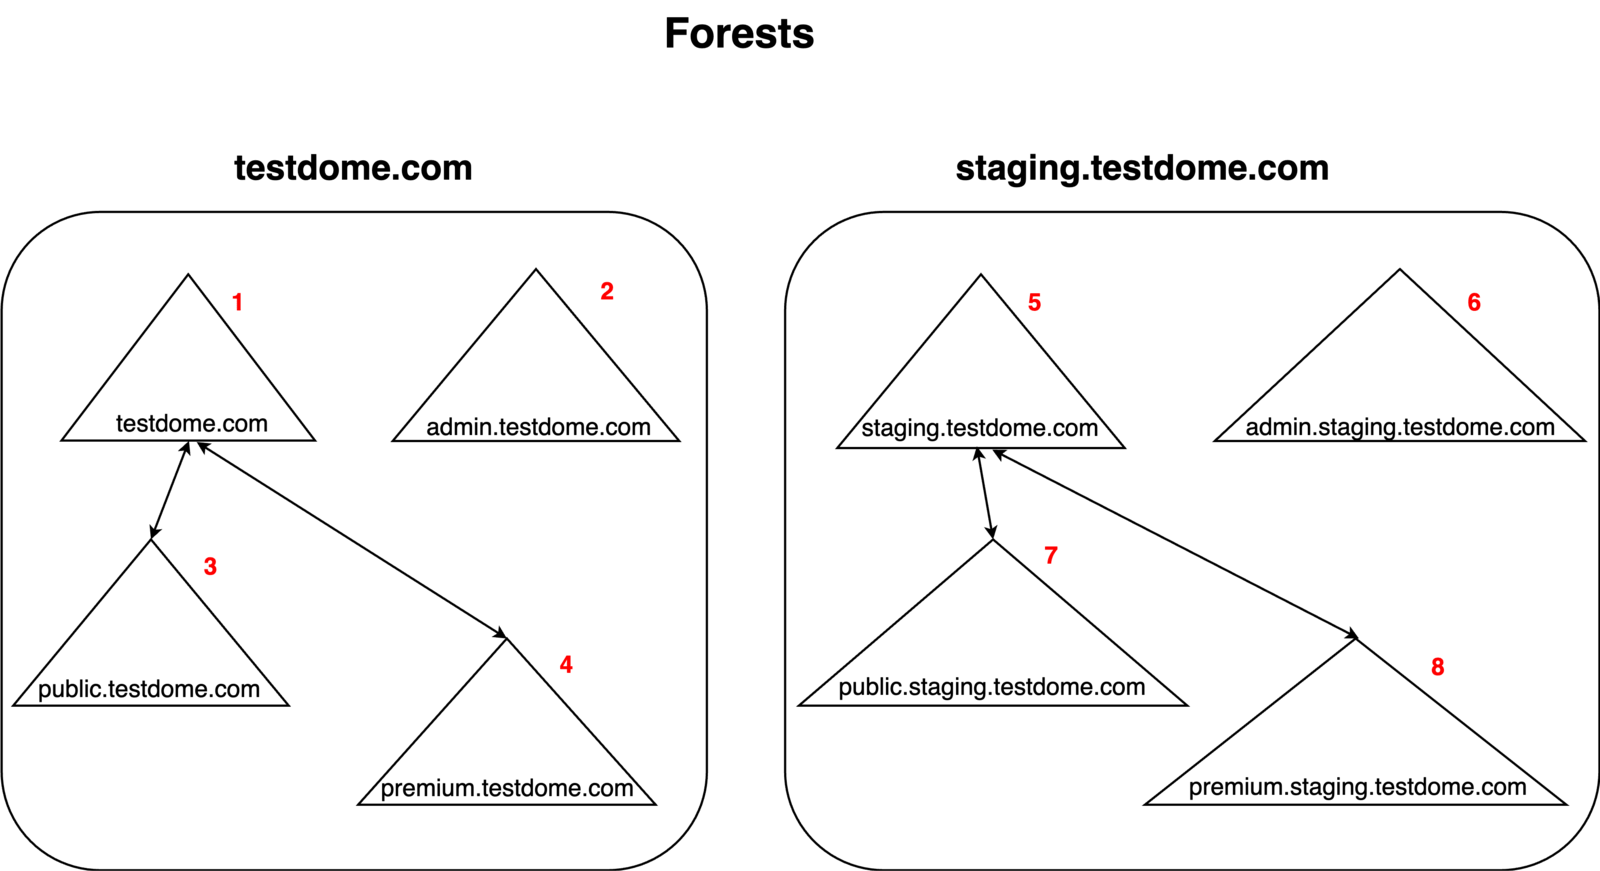 Active Directory Forests